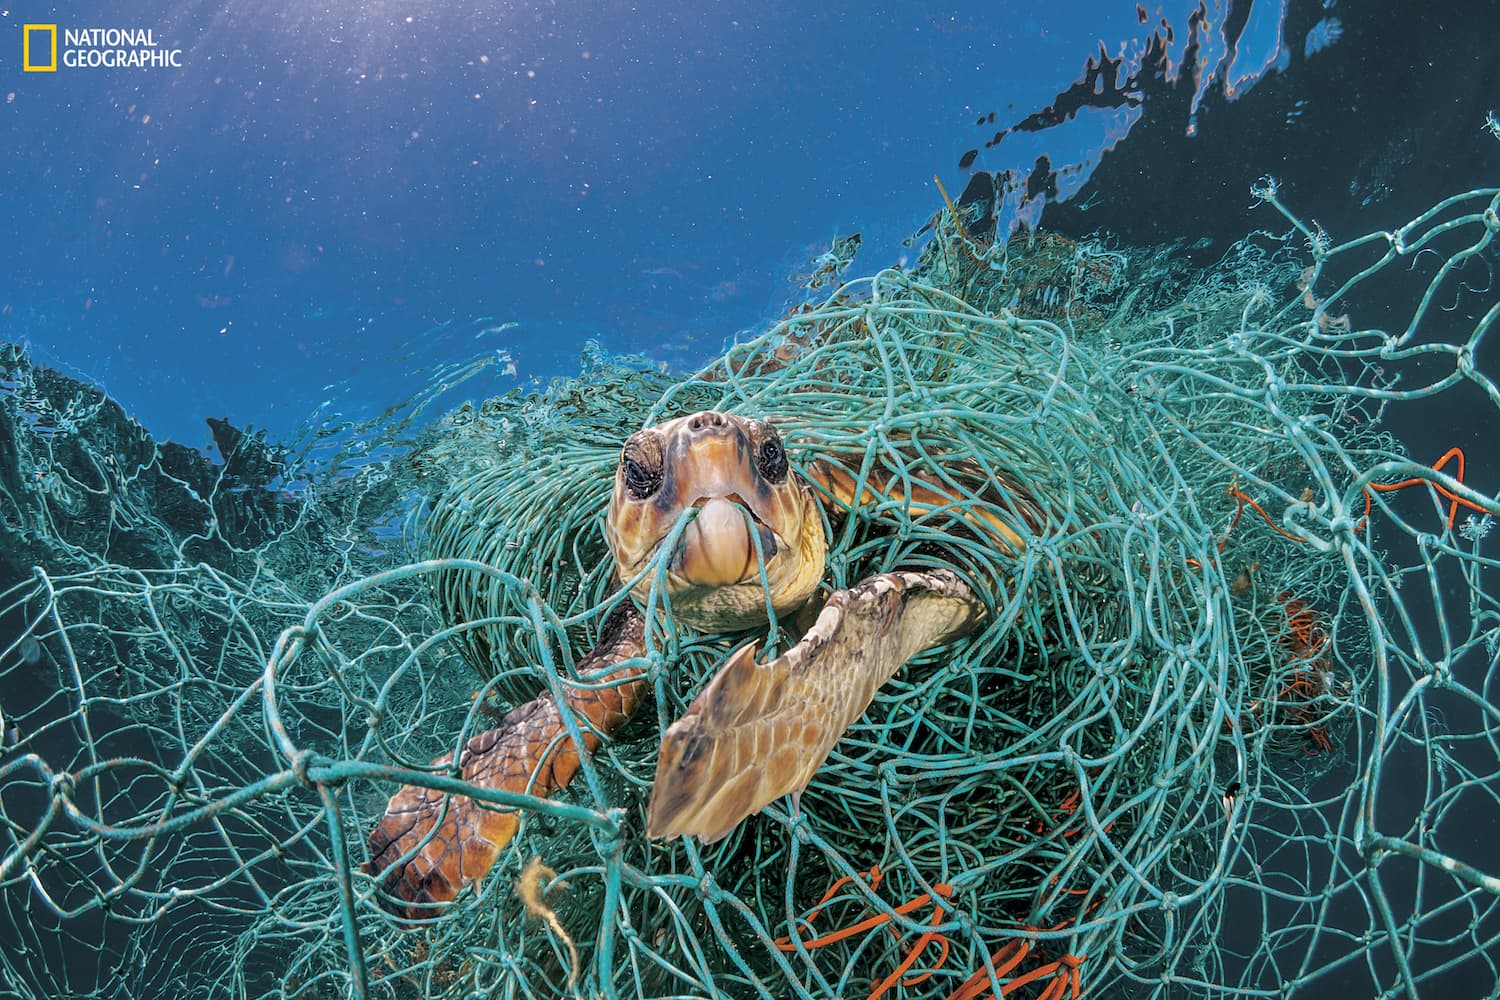 An old plastic fishing net snares a loggerhead turtle in the Mediterranean off Spain. The turtle could stretch its neck above water to breathe but would have died had the photographer not freed it.“Ghost fishing” by derelict gear is a big threat to sea turtles. (Courtesy Jordi Chias/National Geographic)